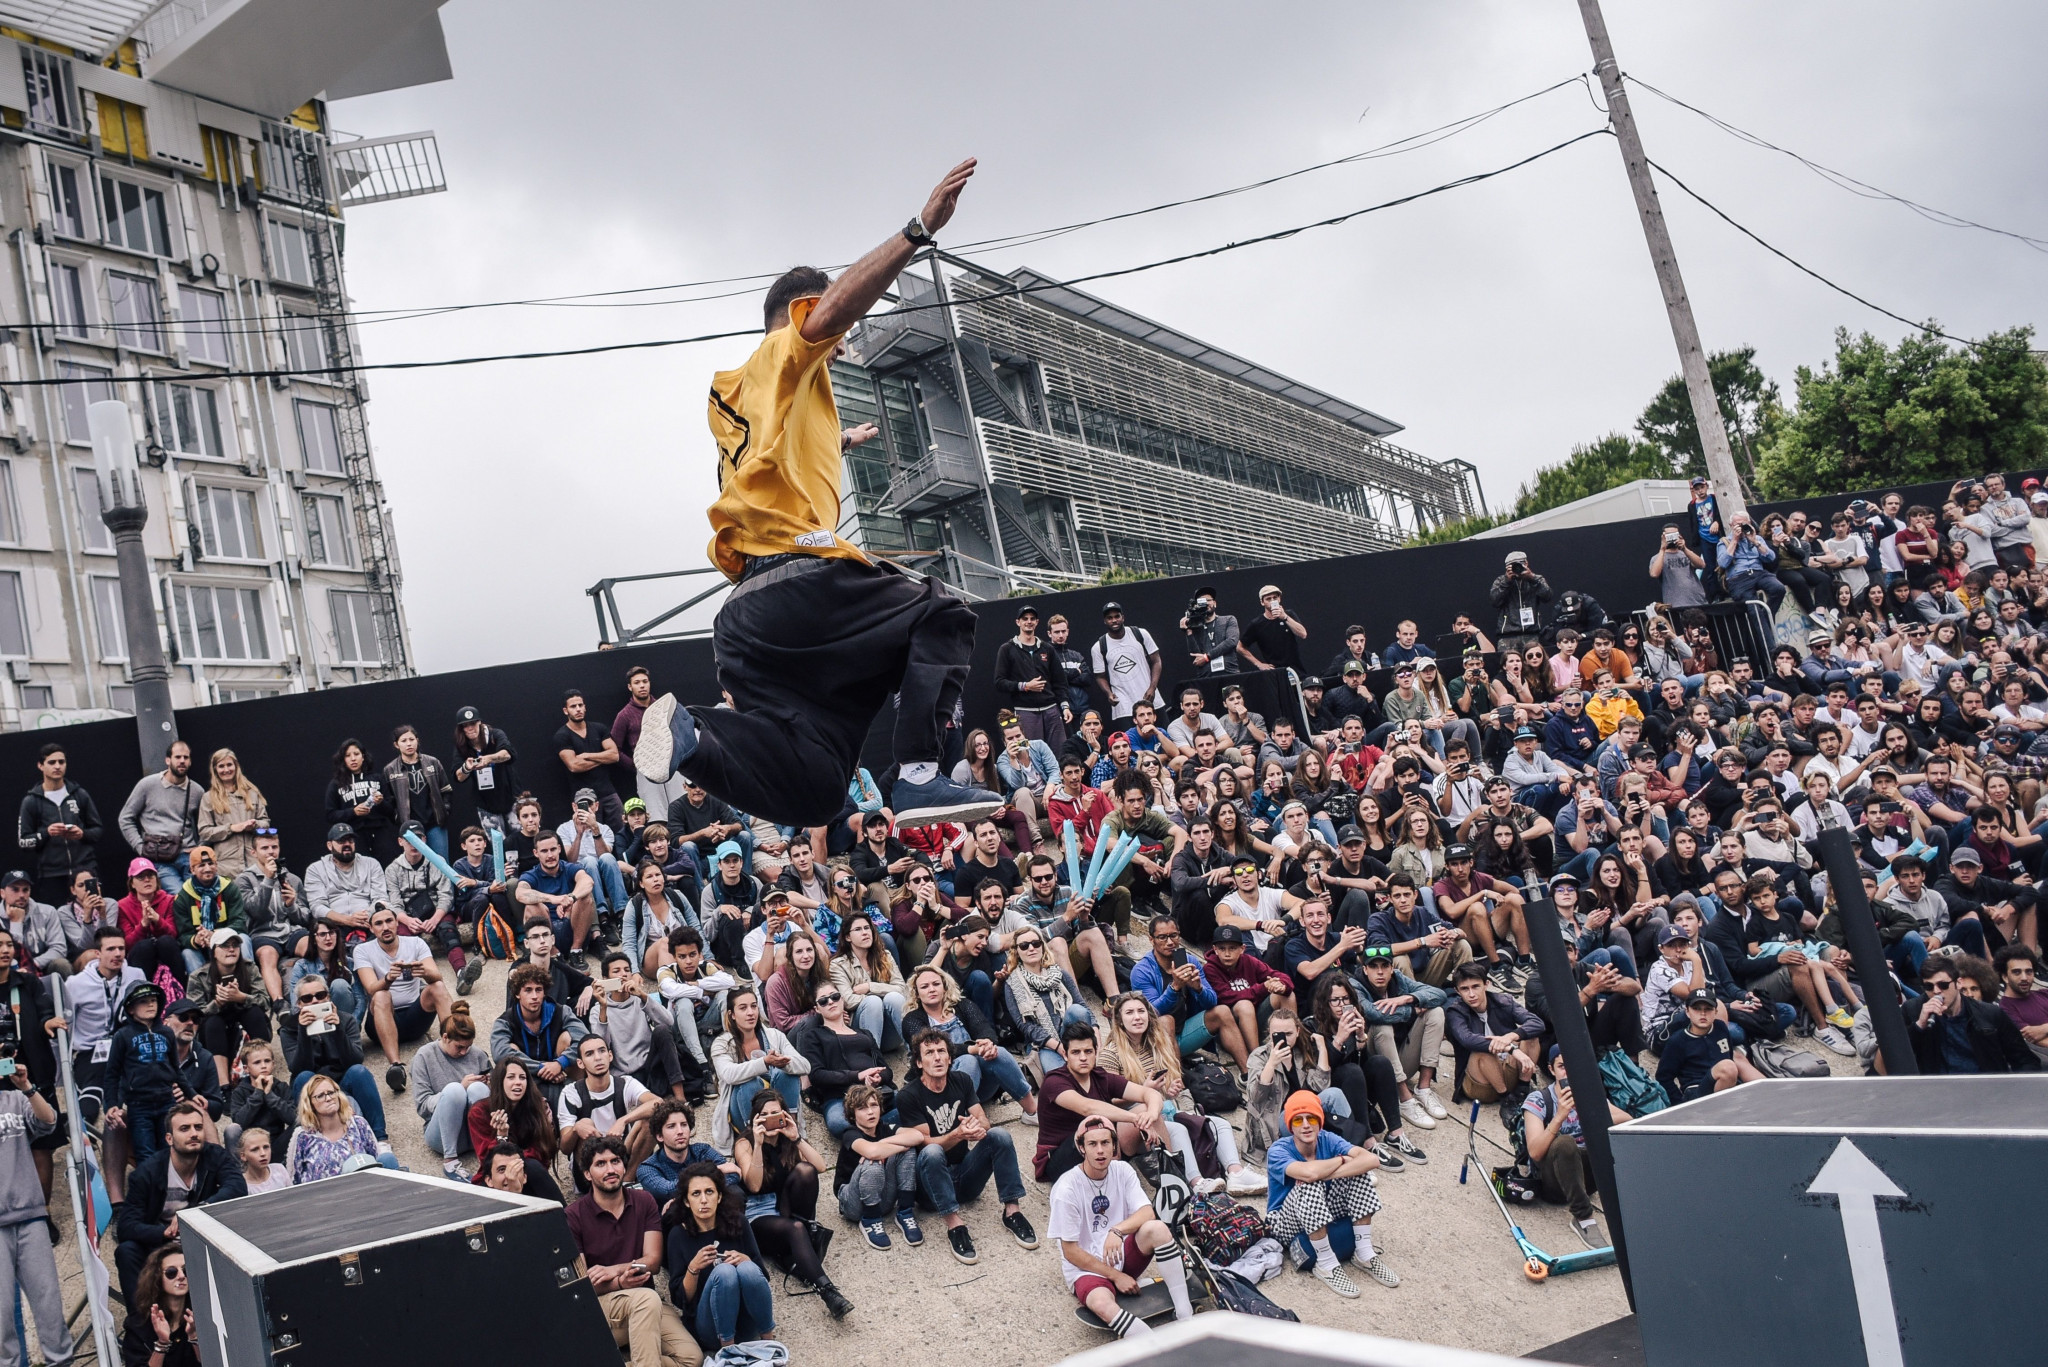 Almost 600,000 spectators are expected to descend on Montpellier for the latest leg of the International Festival of Extreme Sports World Series © Getty Images